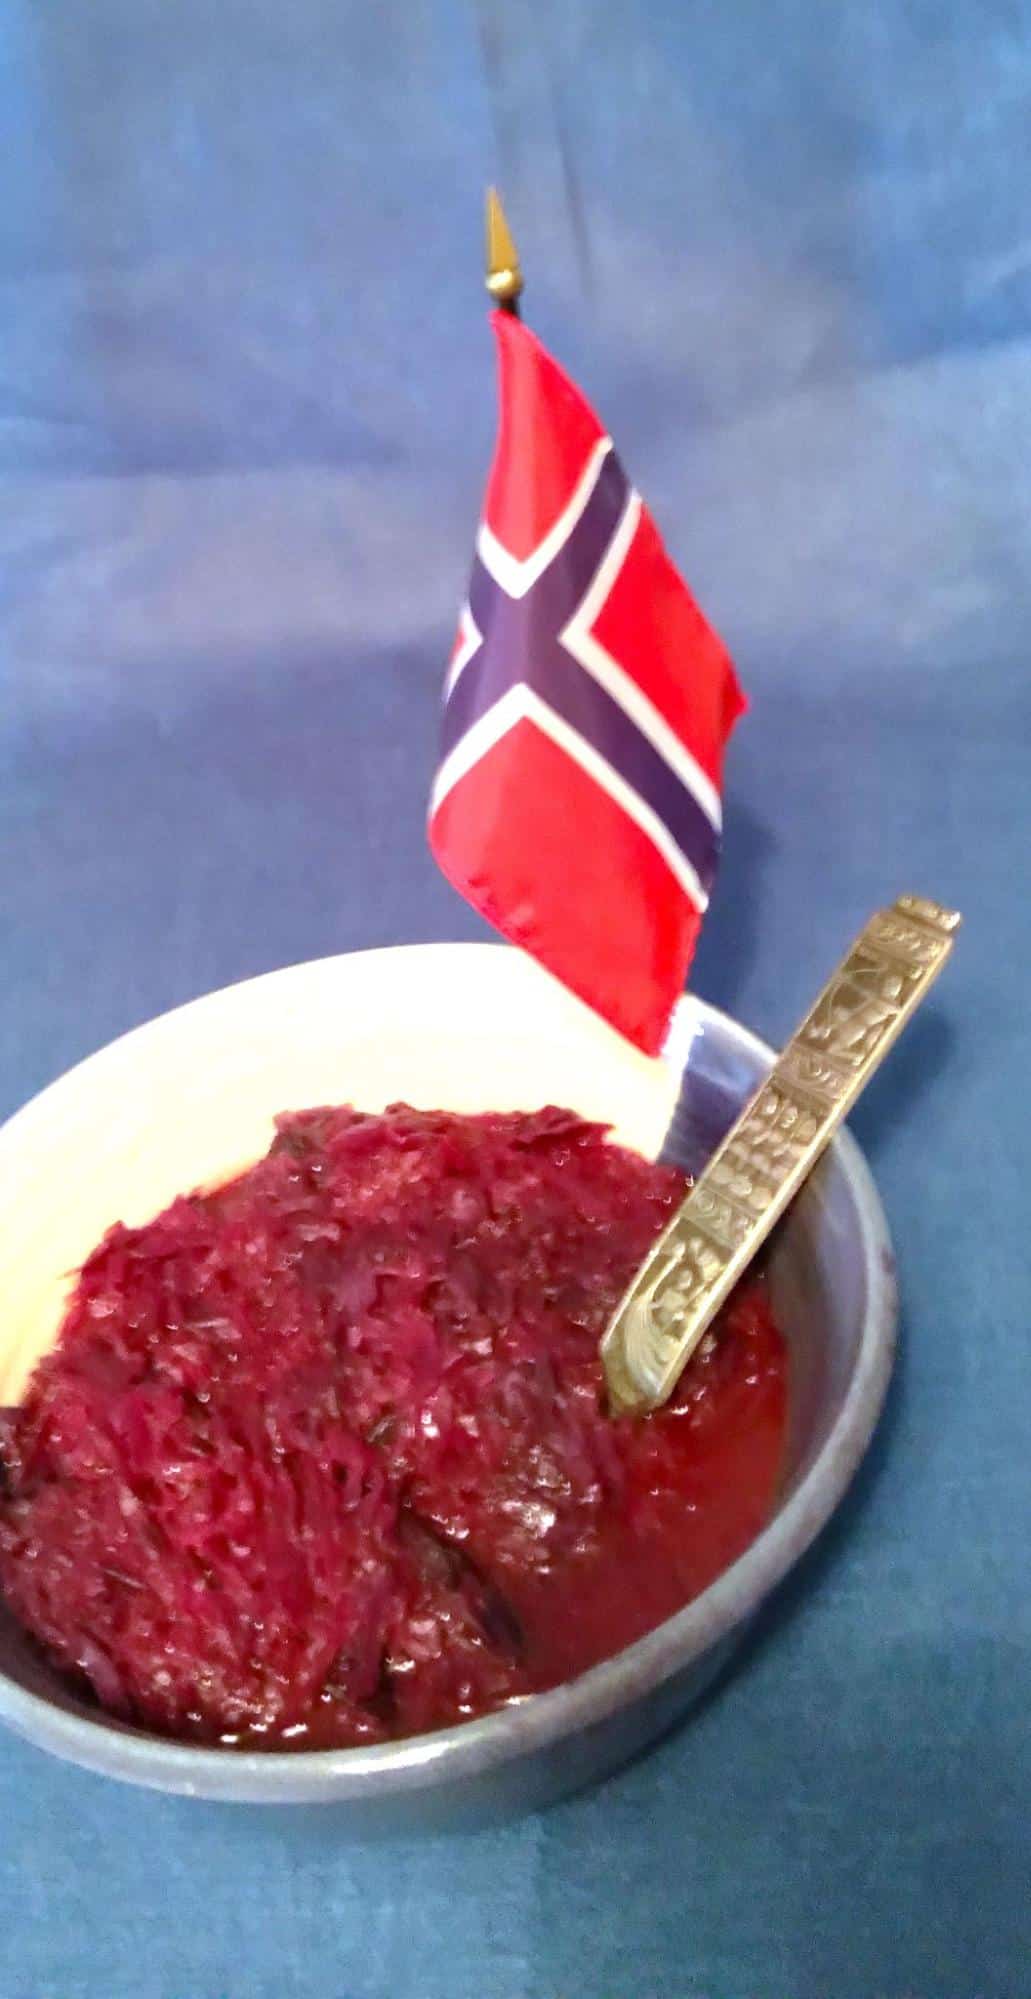 Photo of purple cabbage dish with Norwegian flag